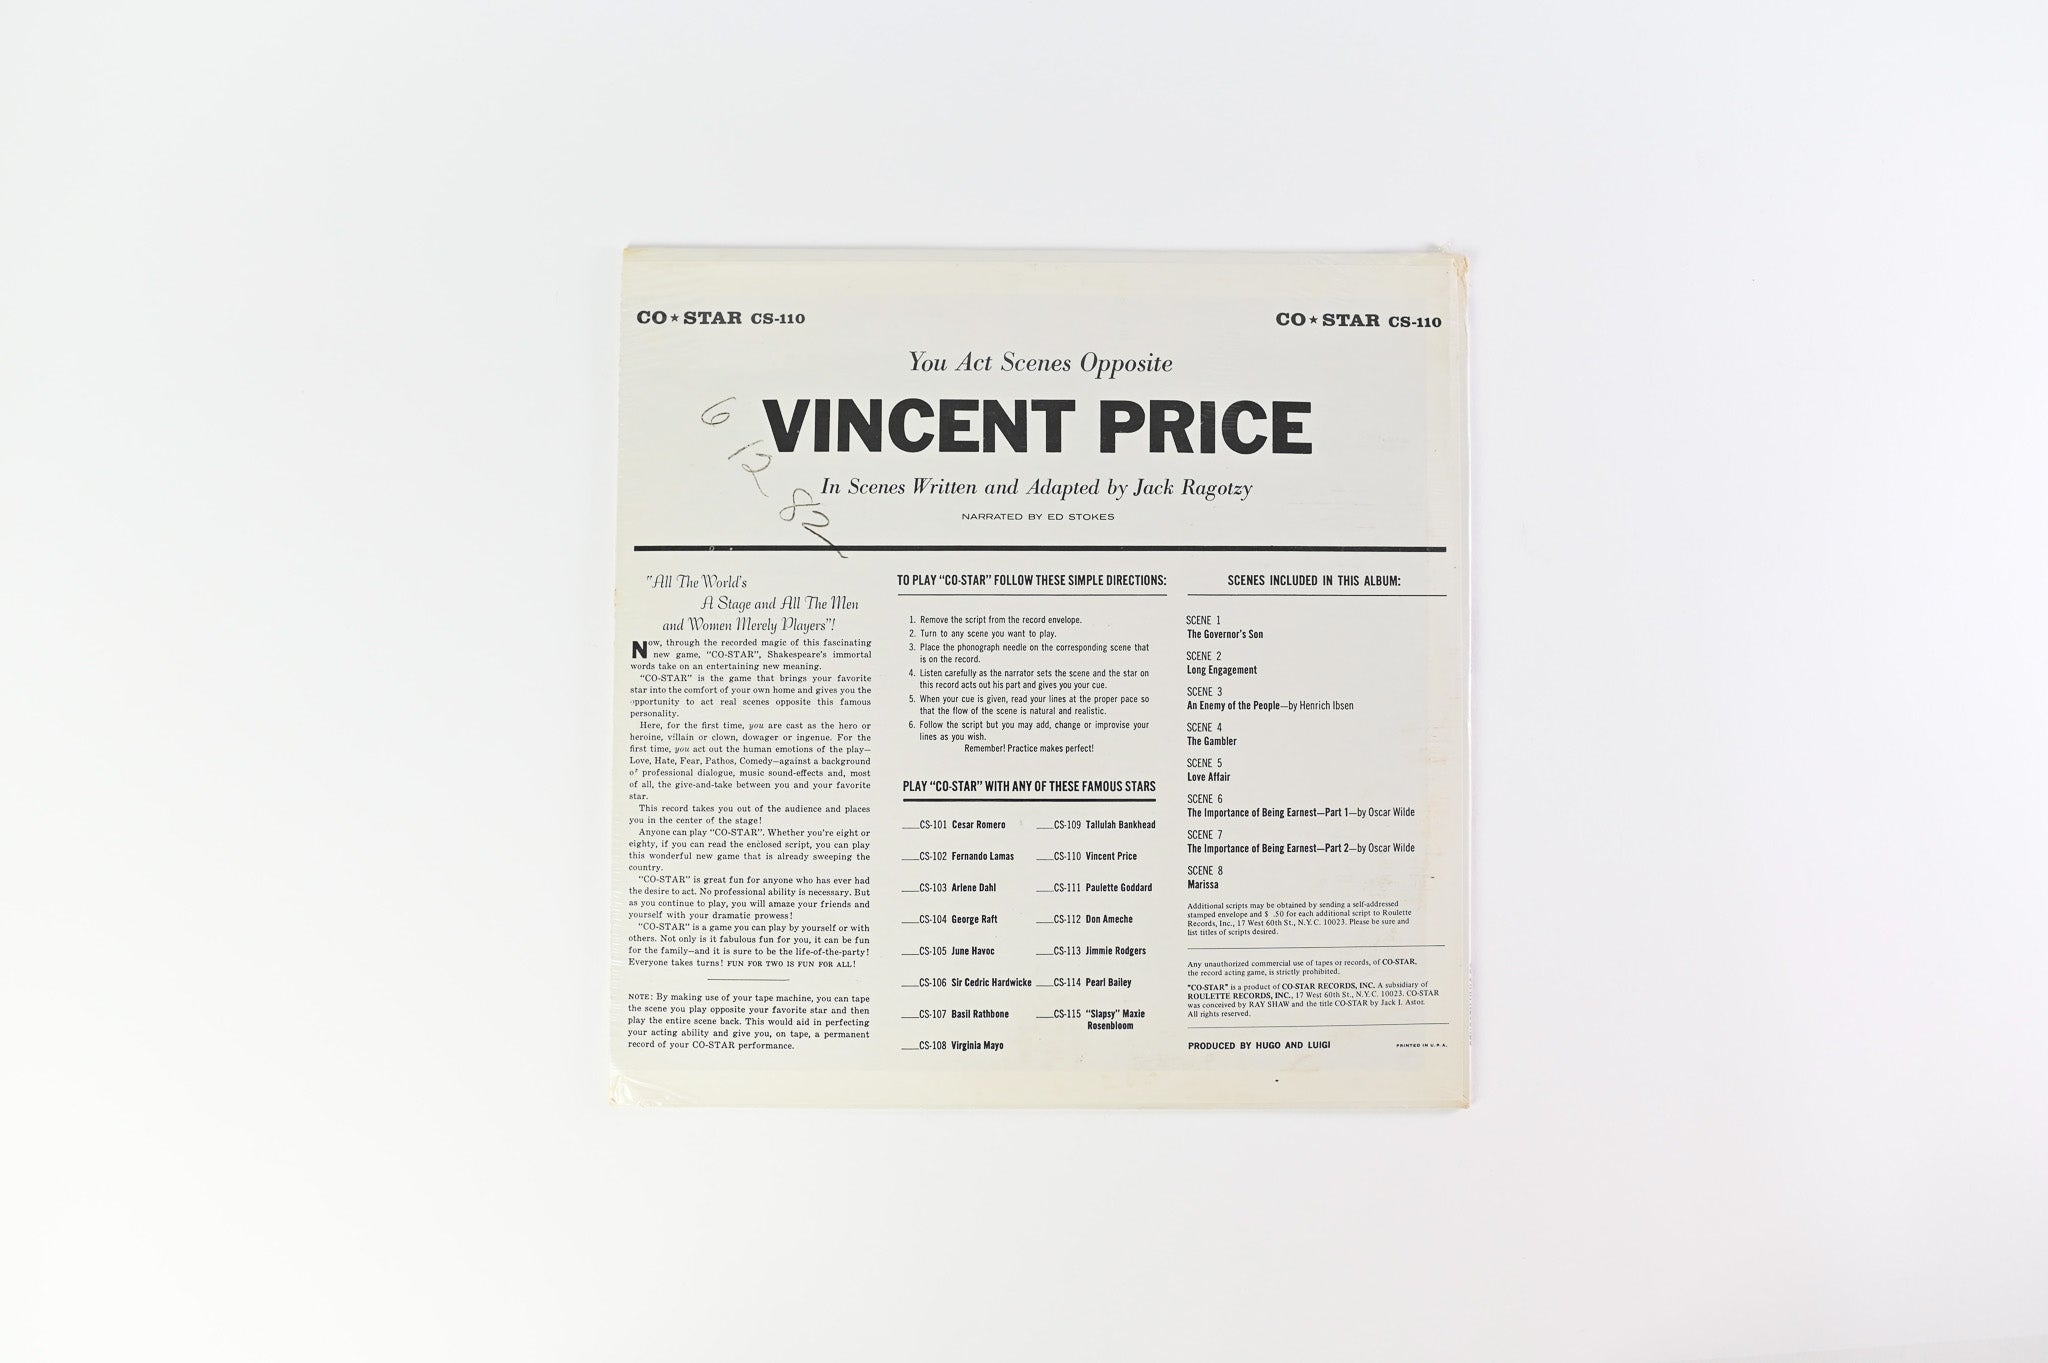 Vincent Price - Co-Star: The Record Acting Game SEALED on Co-Star